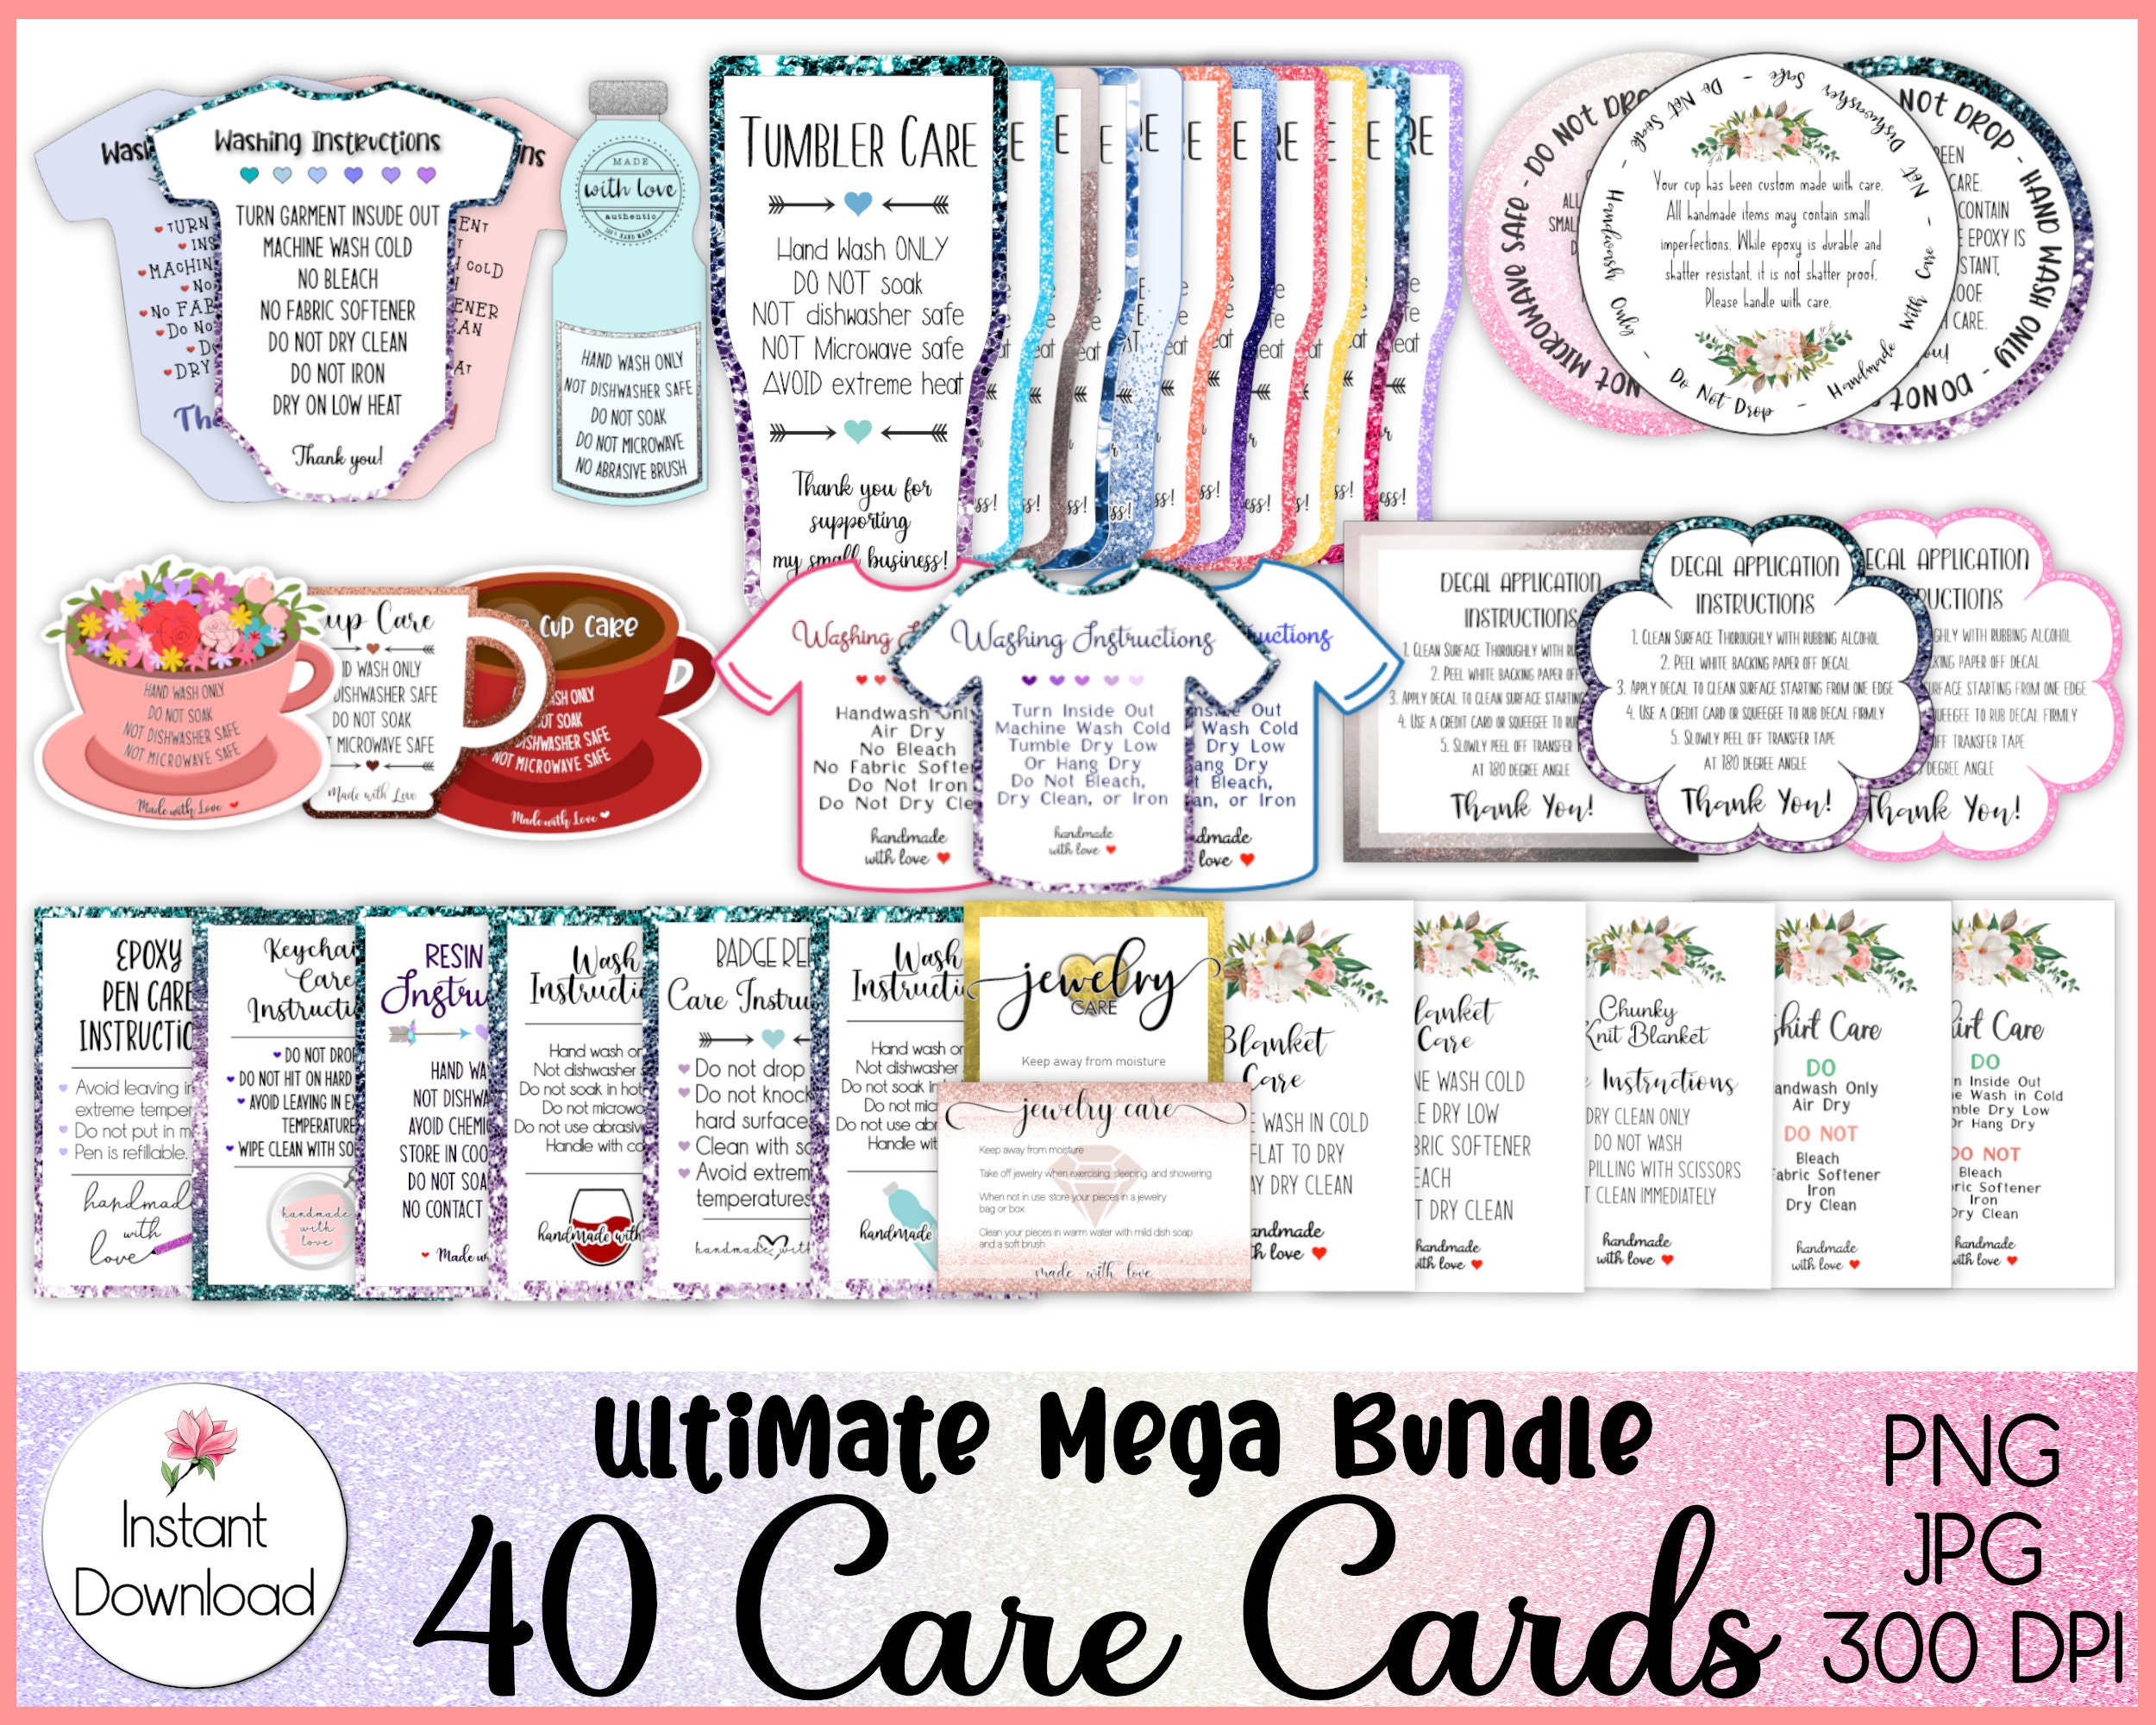 M&H Invites 100 Iced Tumbler Care Instructions Cards - Cup Care Instruction Insert for Small Business - Customer Directions Cards for Tumbler with